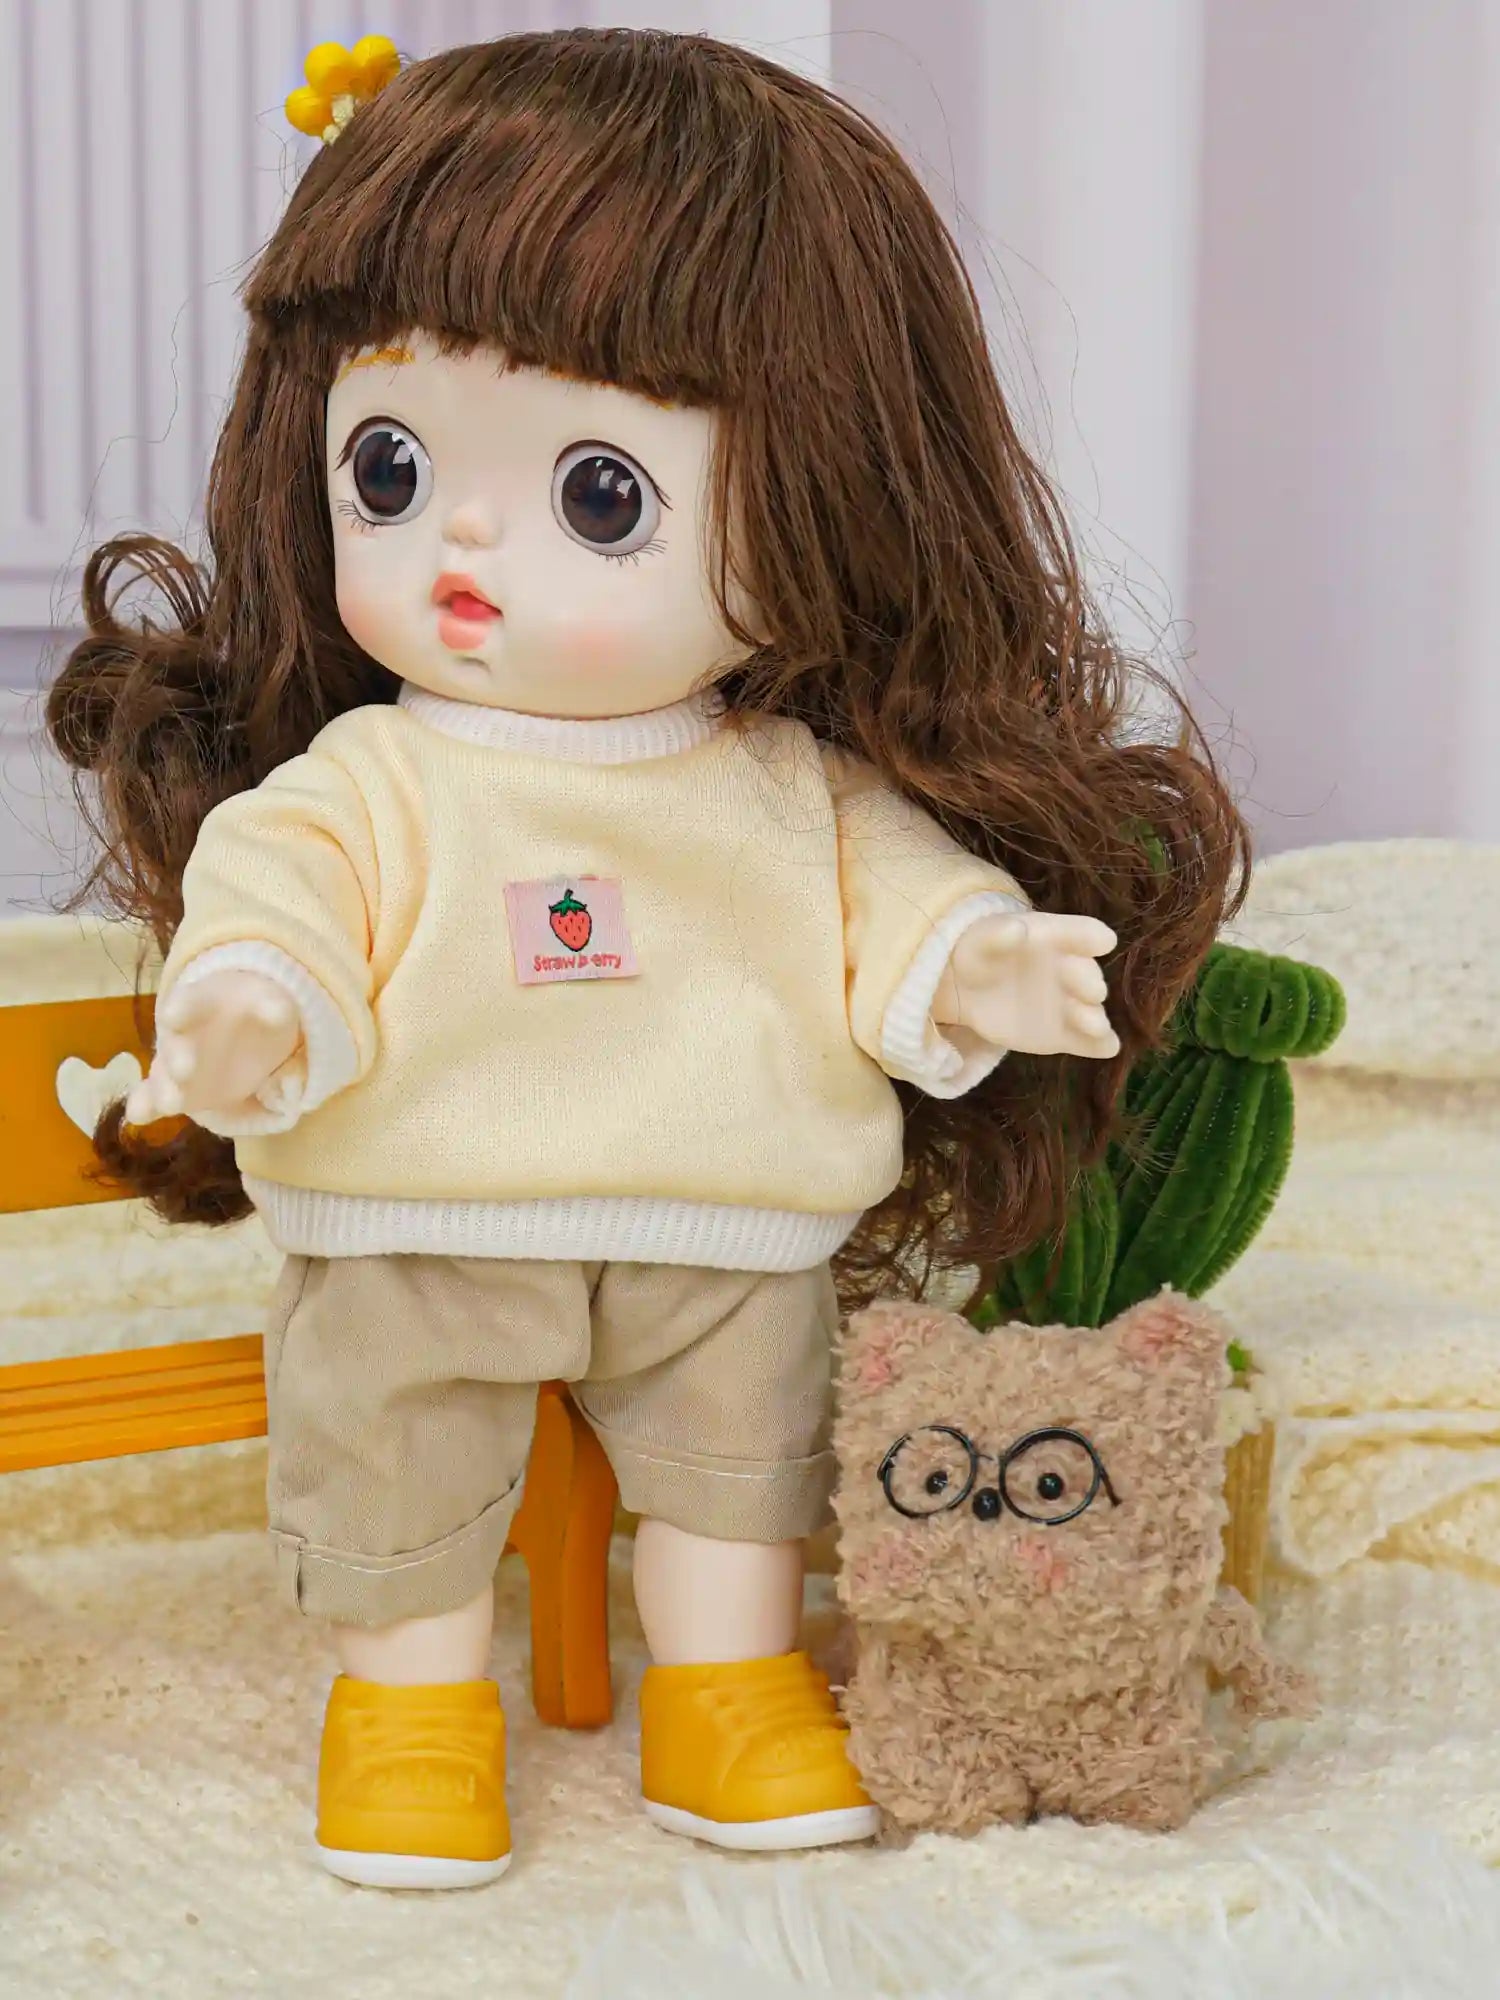 Playful doll with a fringe, clad in a warm sweater and rolled up pants, next to a plush toy in a playful setting.